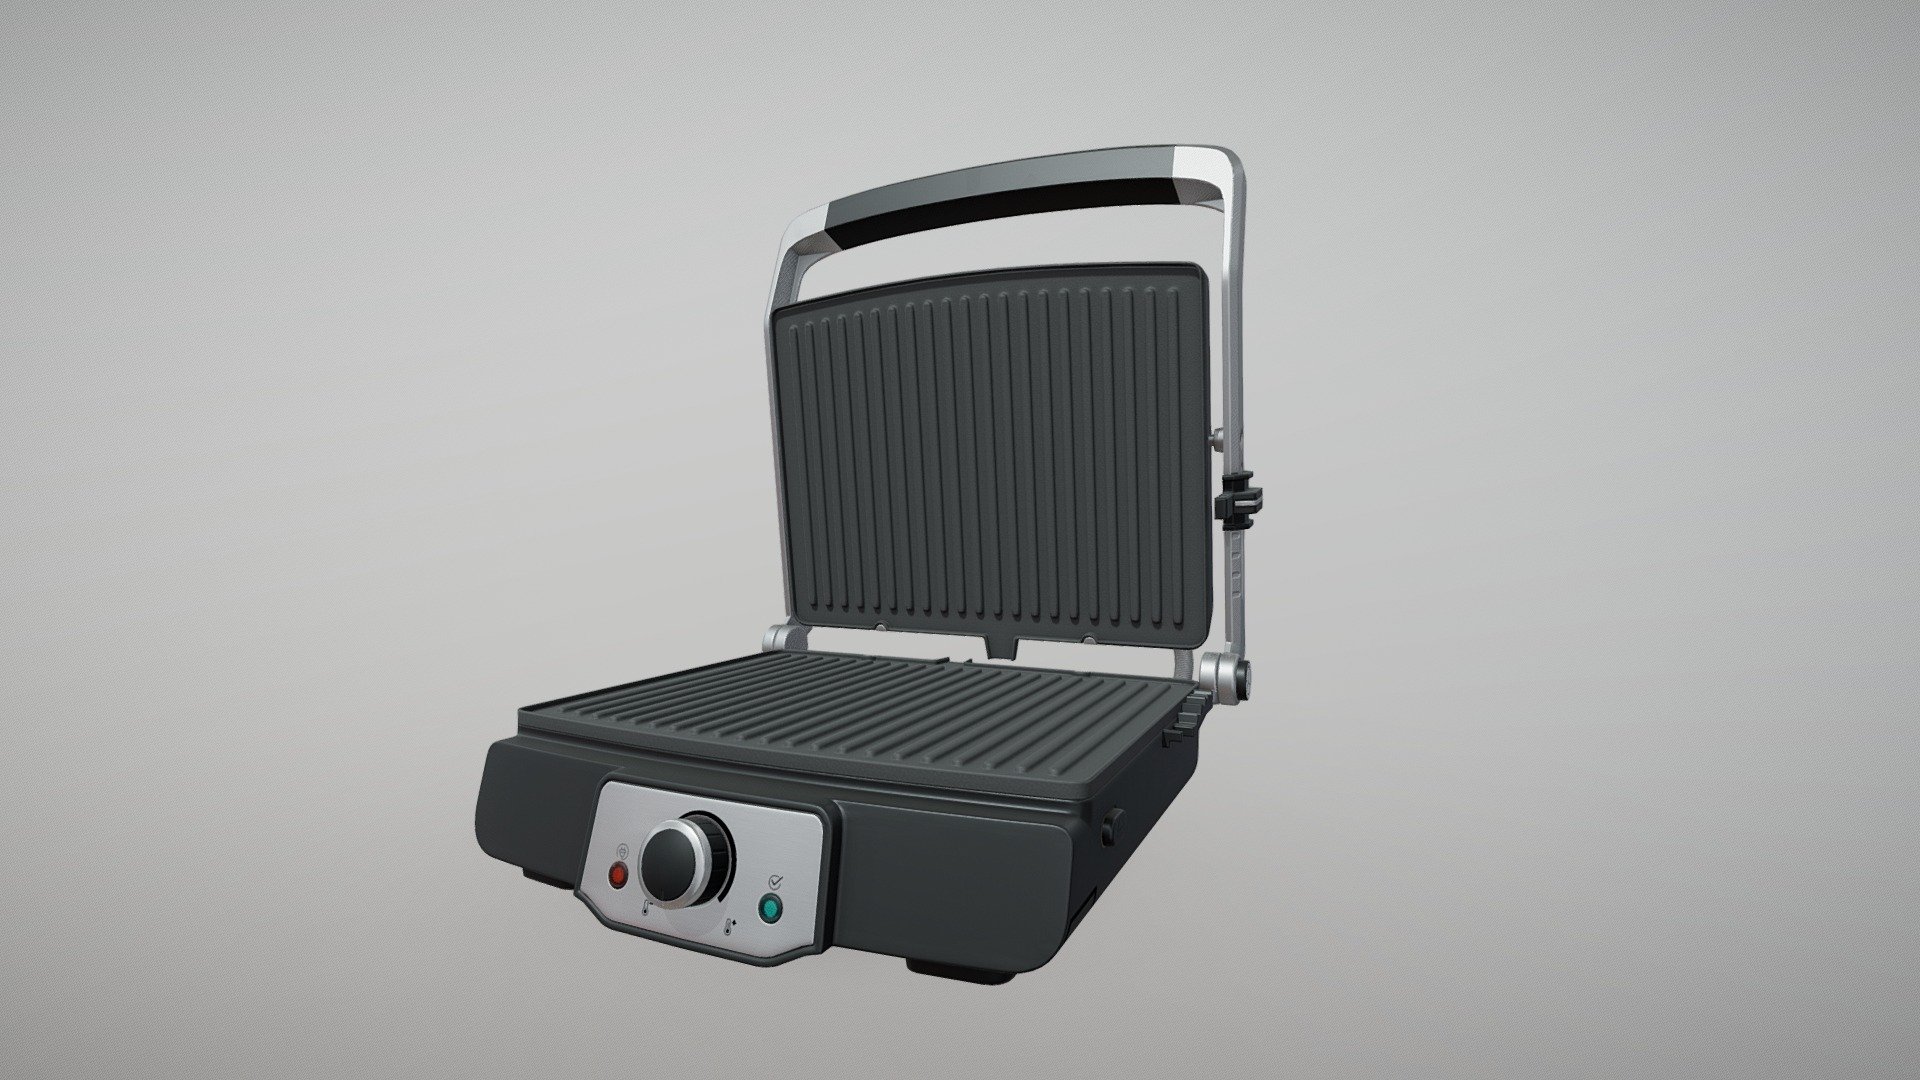 QILIVE Grill Q.5077  model
VR and game ready for high quality Architectural Visualization - QILIVE Grill Q.5077 - 3D model by Invrsion 3d model